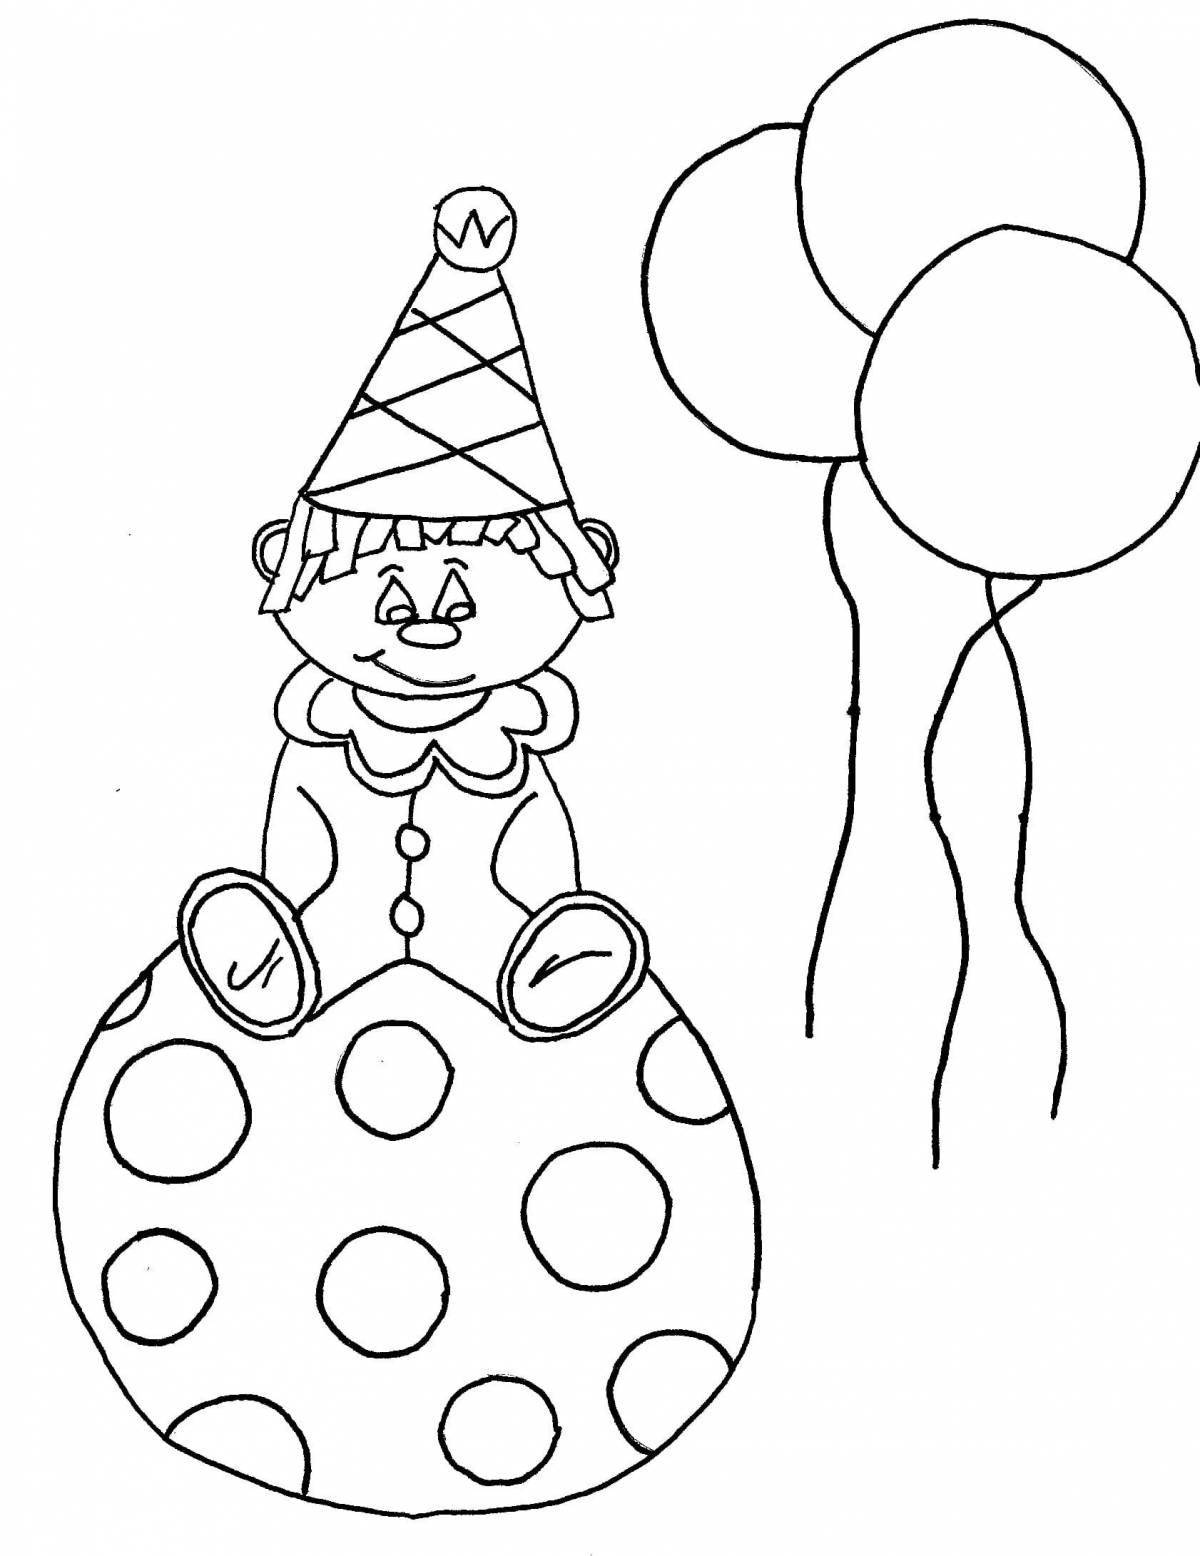 Magic clown coloring pages for kids